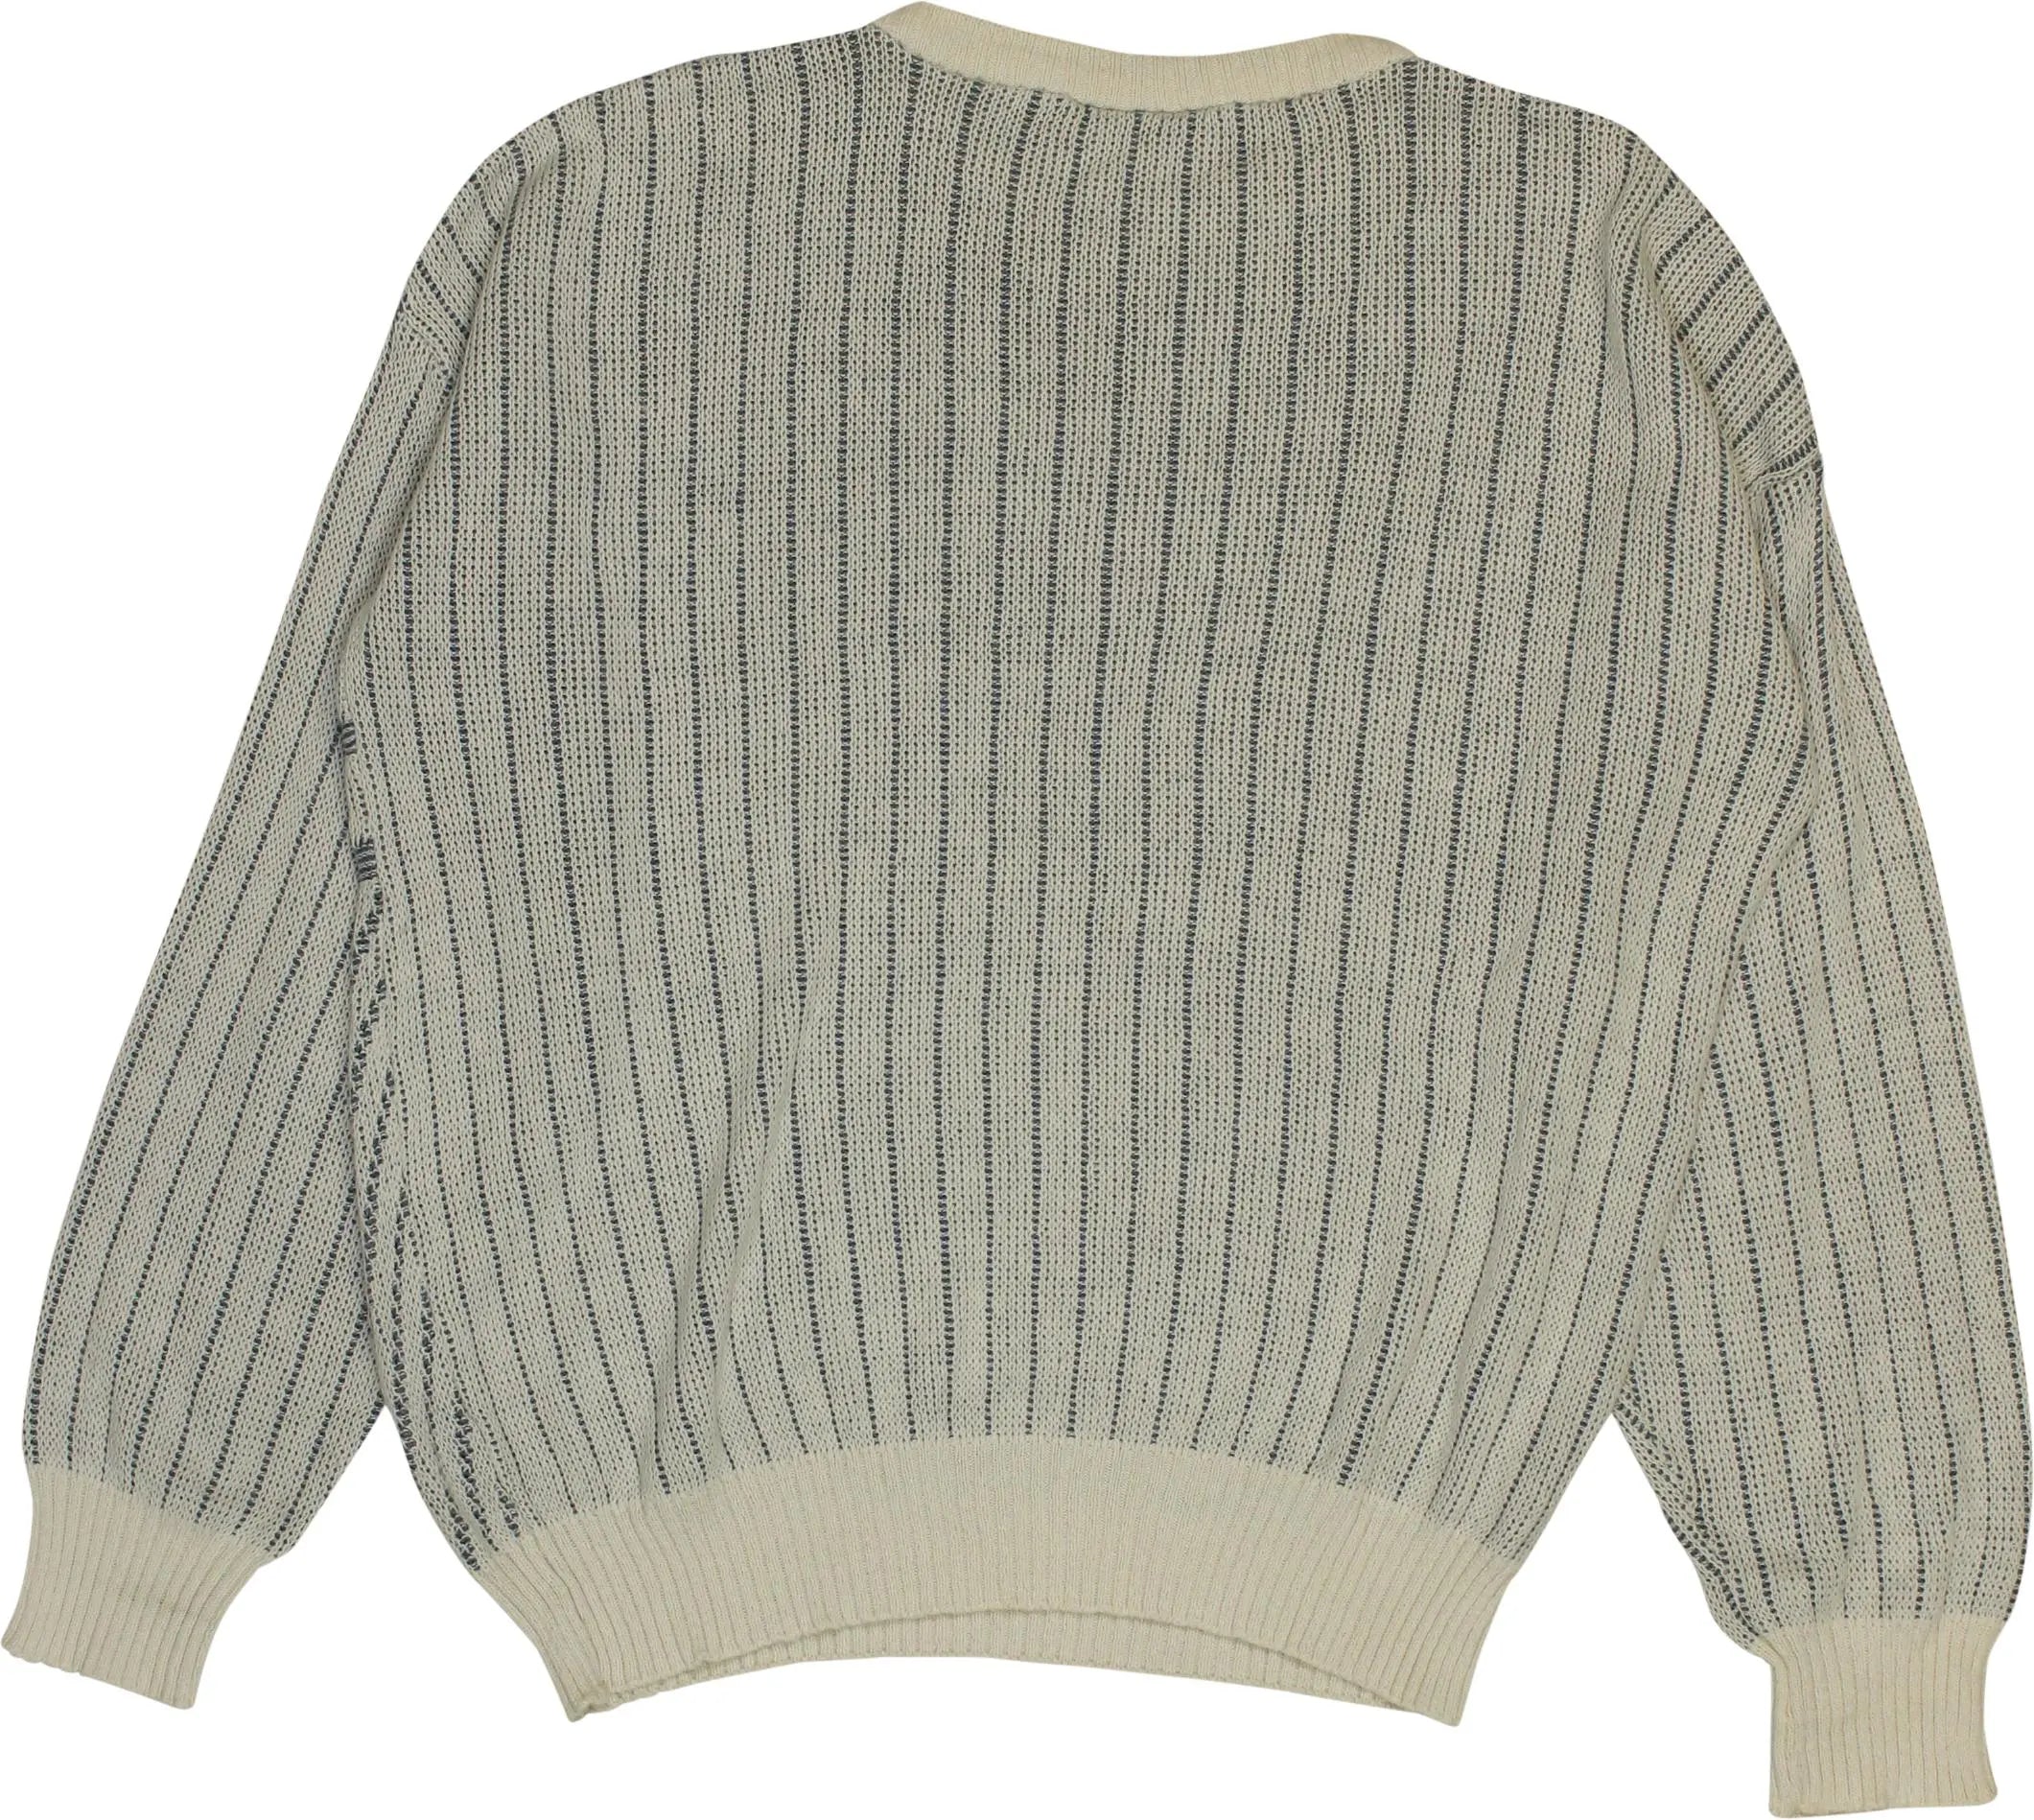 Caledonian - 80's Jumper- ThriftTale.com - Vintage and second handclothing